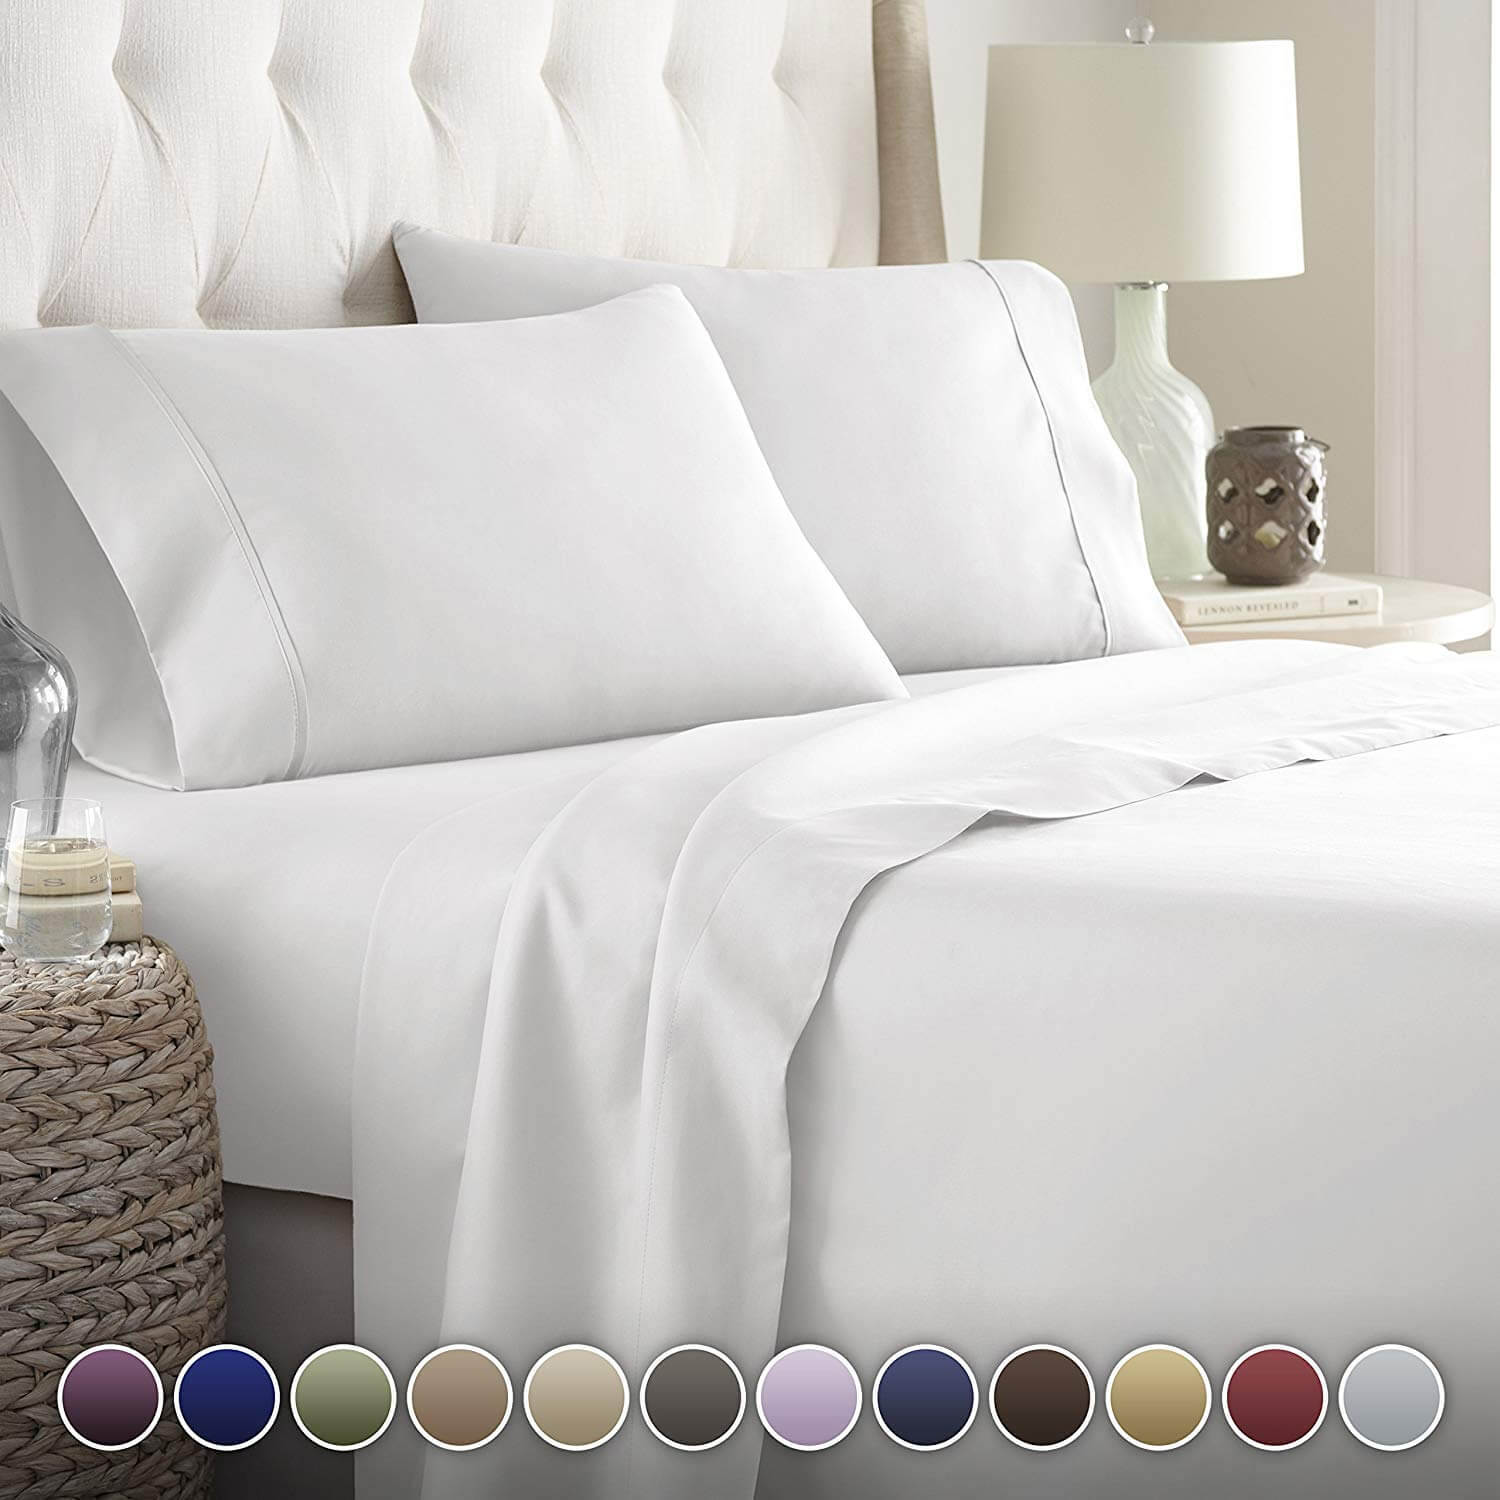 10. Hotel Luxury Bed Sheets Set- 1800 Series